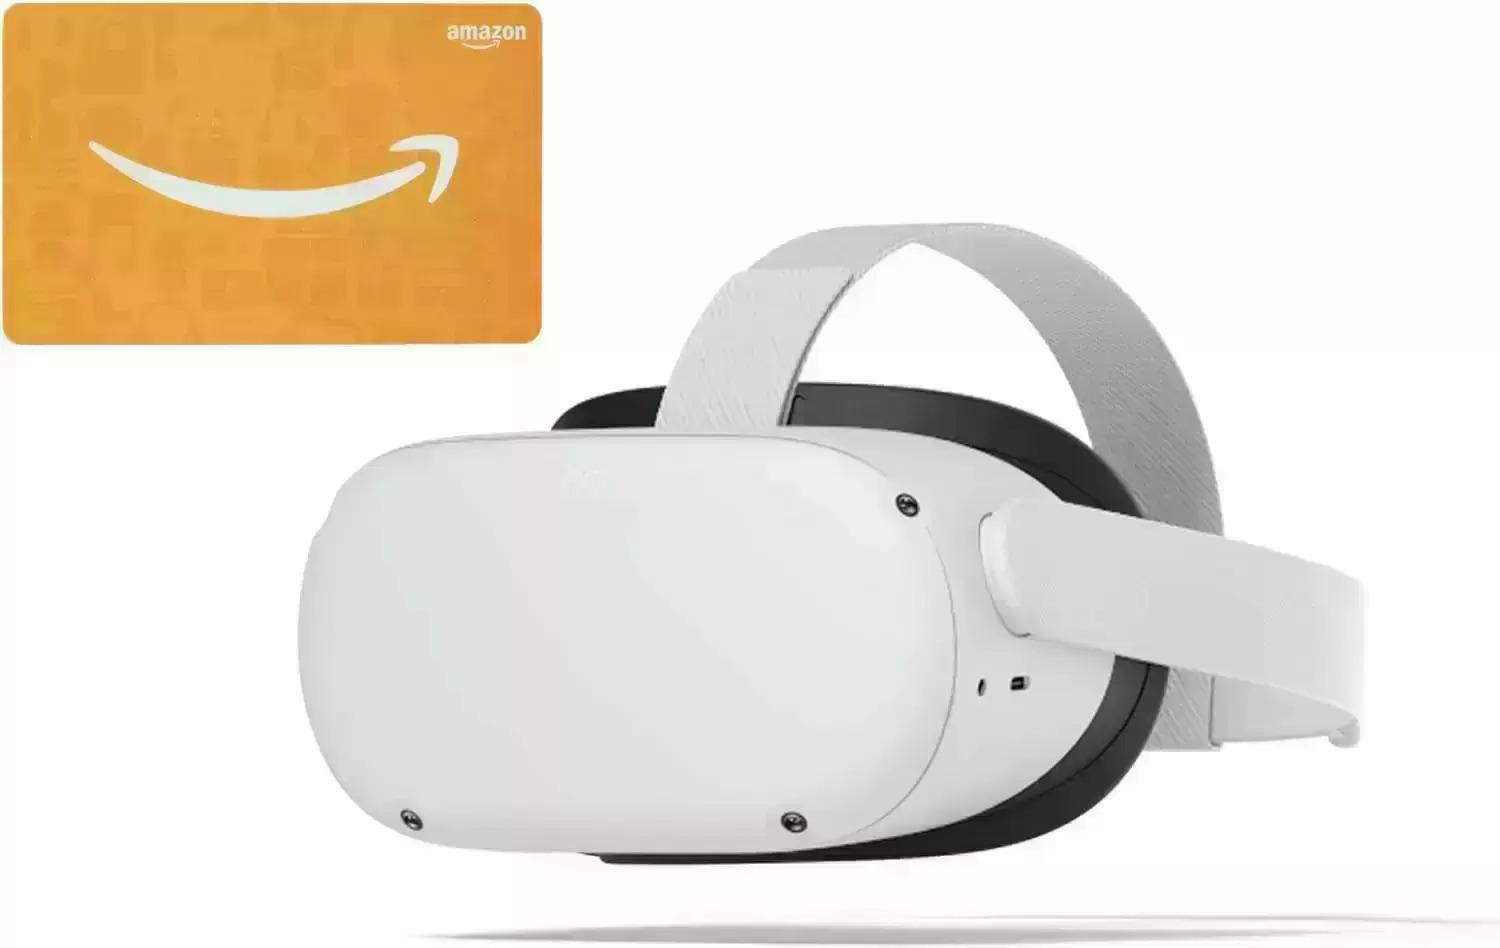 Meta Quest 2 All-In-One VR Headset + $50 Amazon Gift Card for $249 Shipped